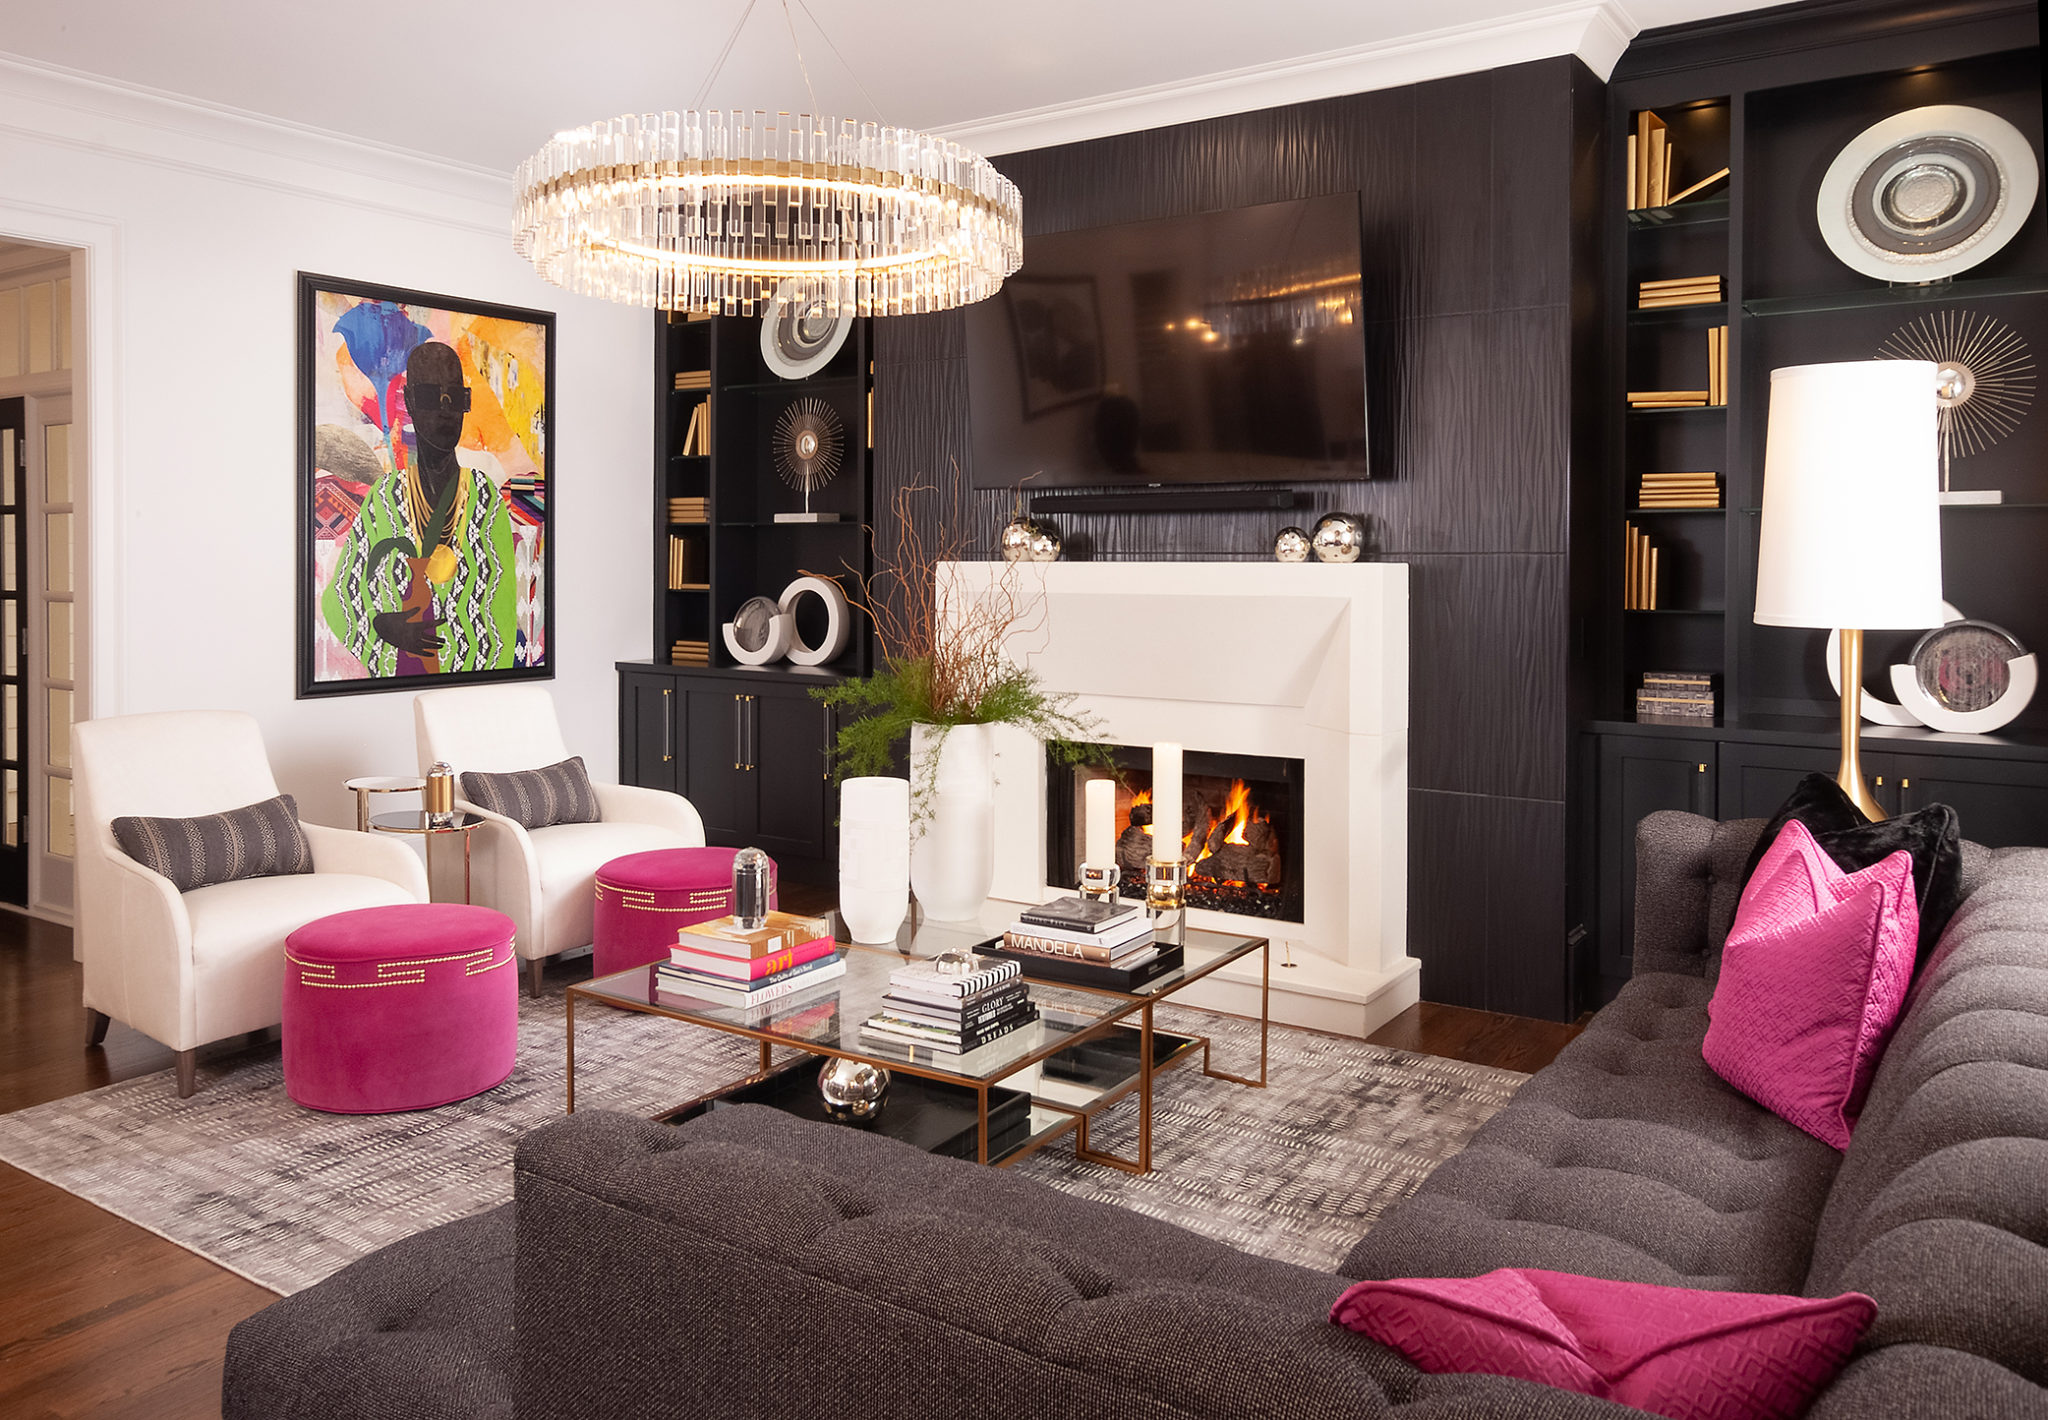 Living Room with Pink Pillows and Ottomans